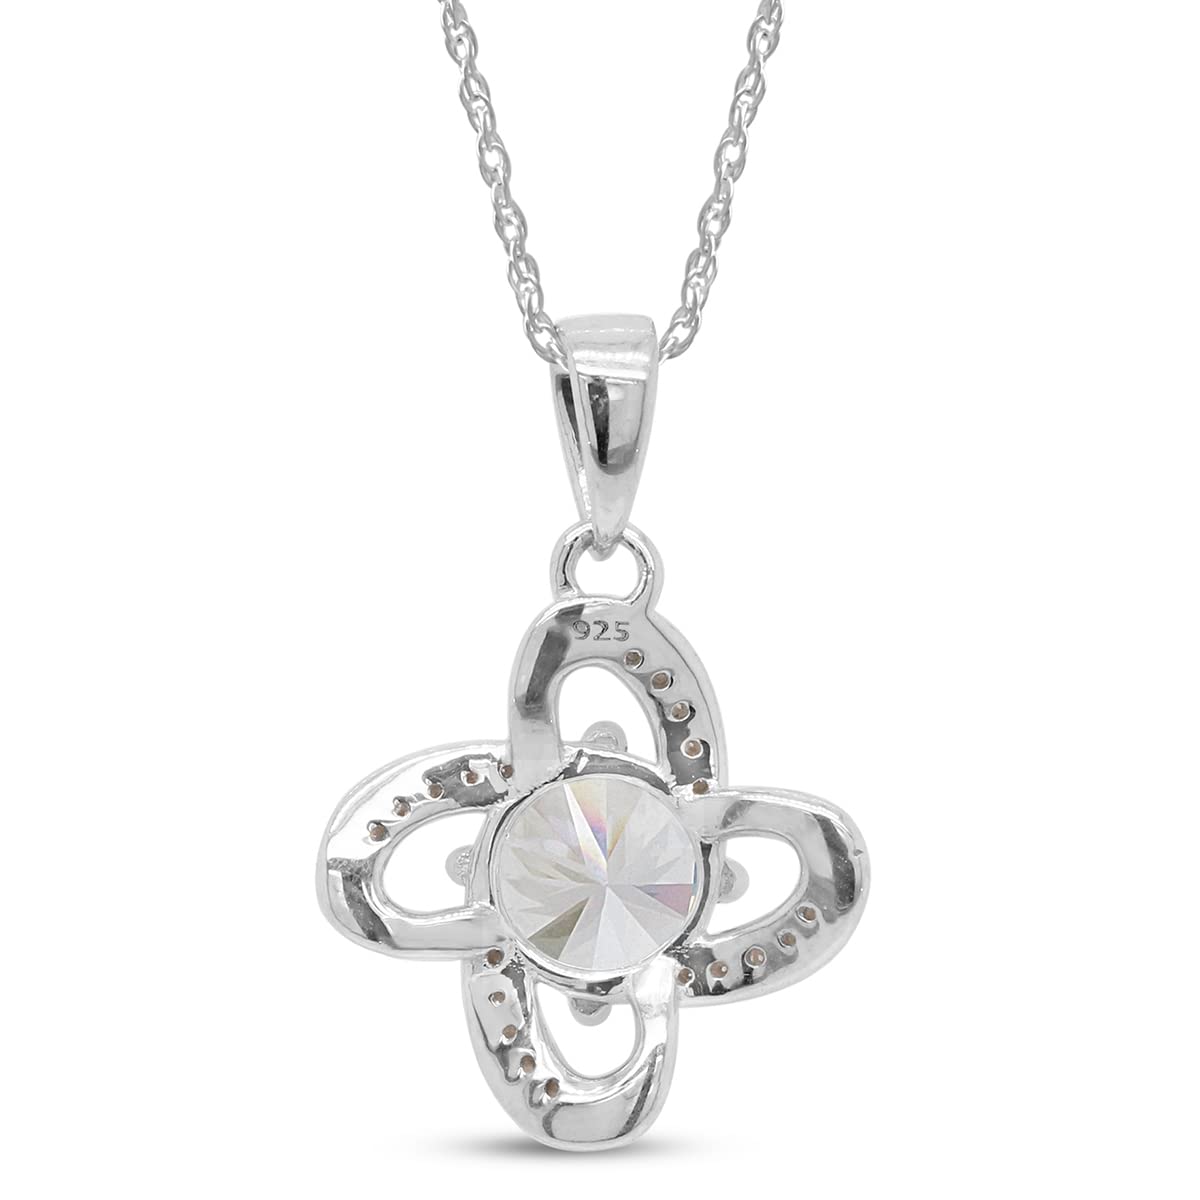 Load image into Gallery viewer, 6.5MM Center, Round Cut Lab Created Moissanite Diamond Flower Knot Pendant Necklace In 925 Sterling Silver For Women (1 Cttw)
